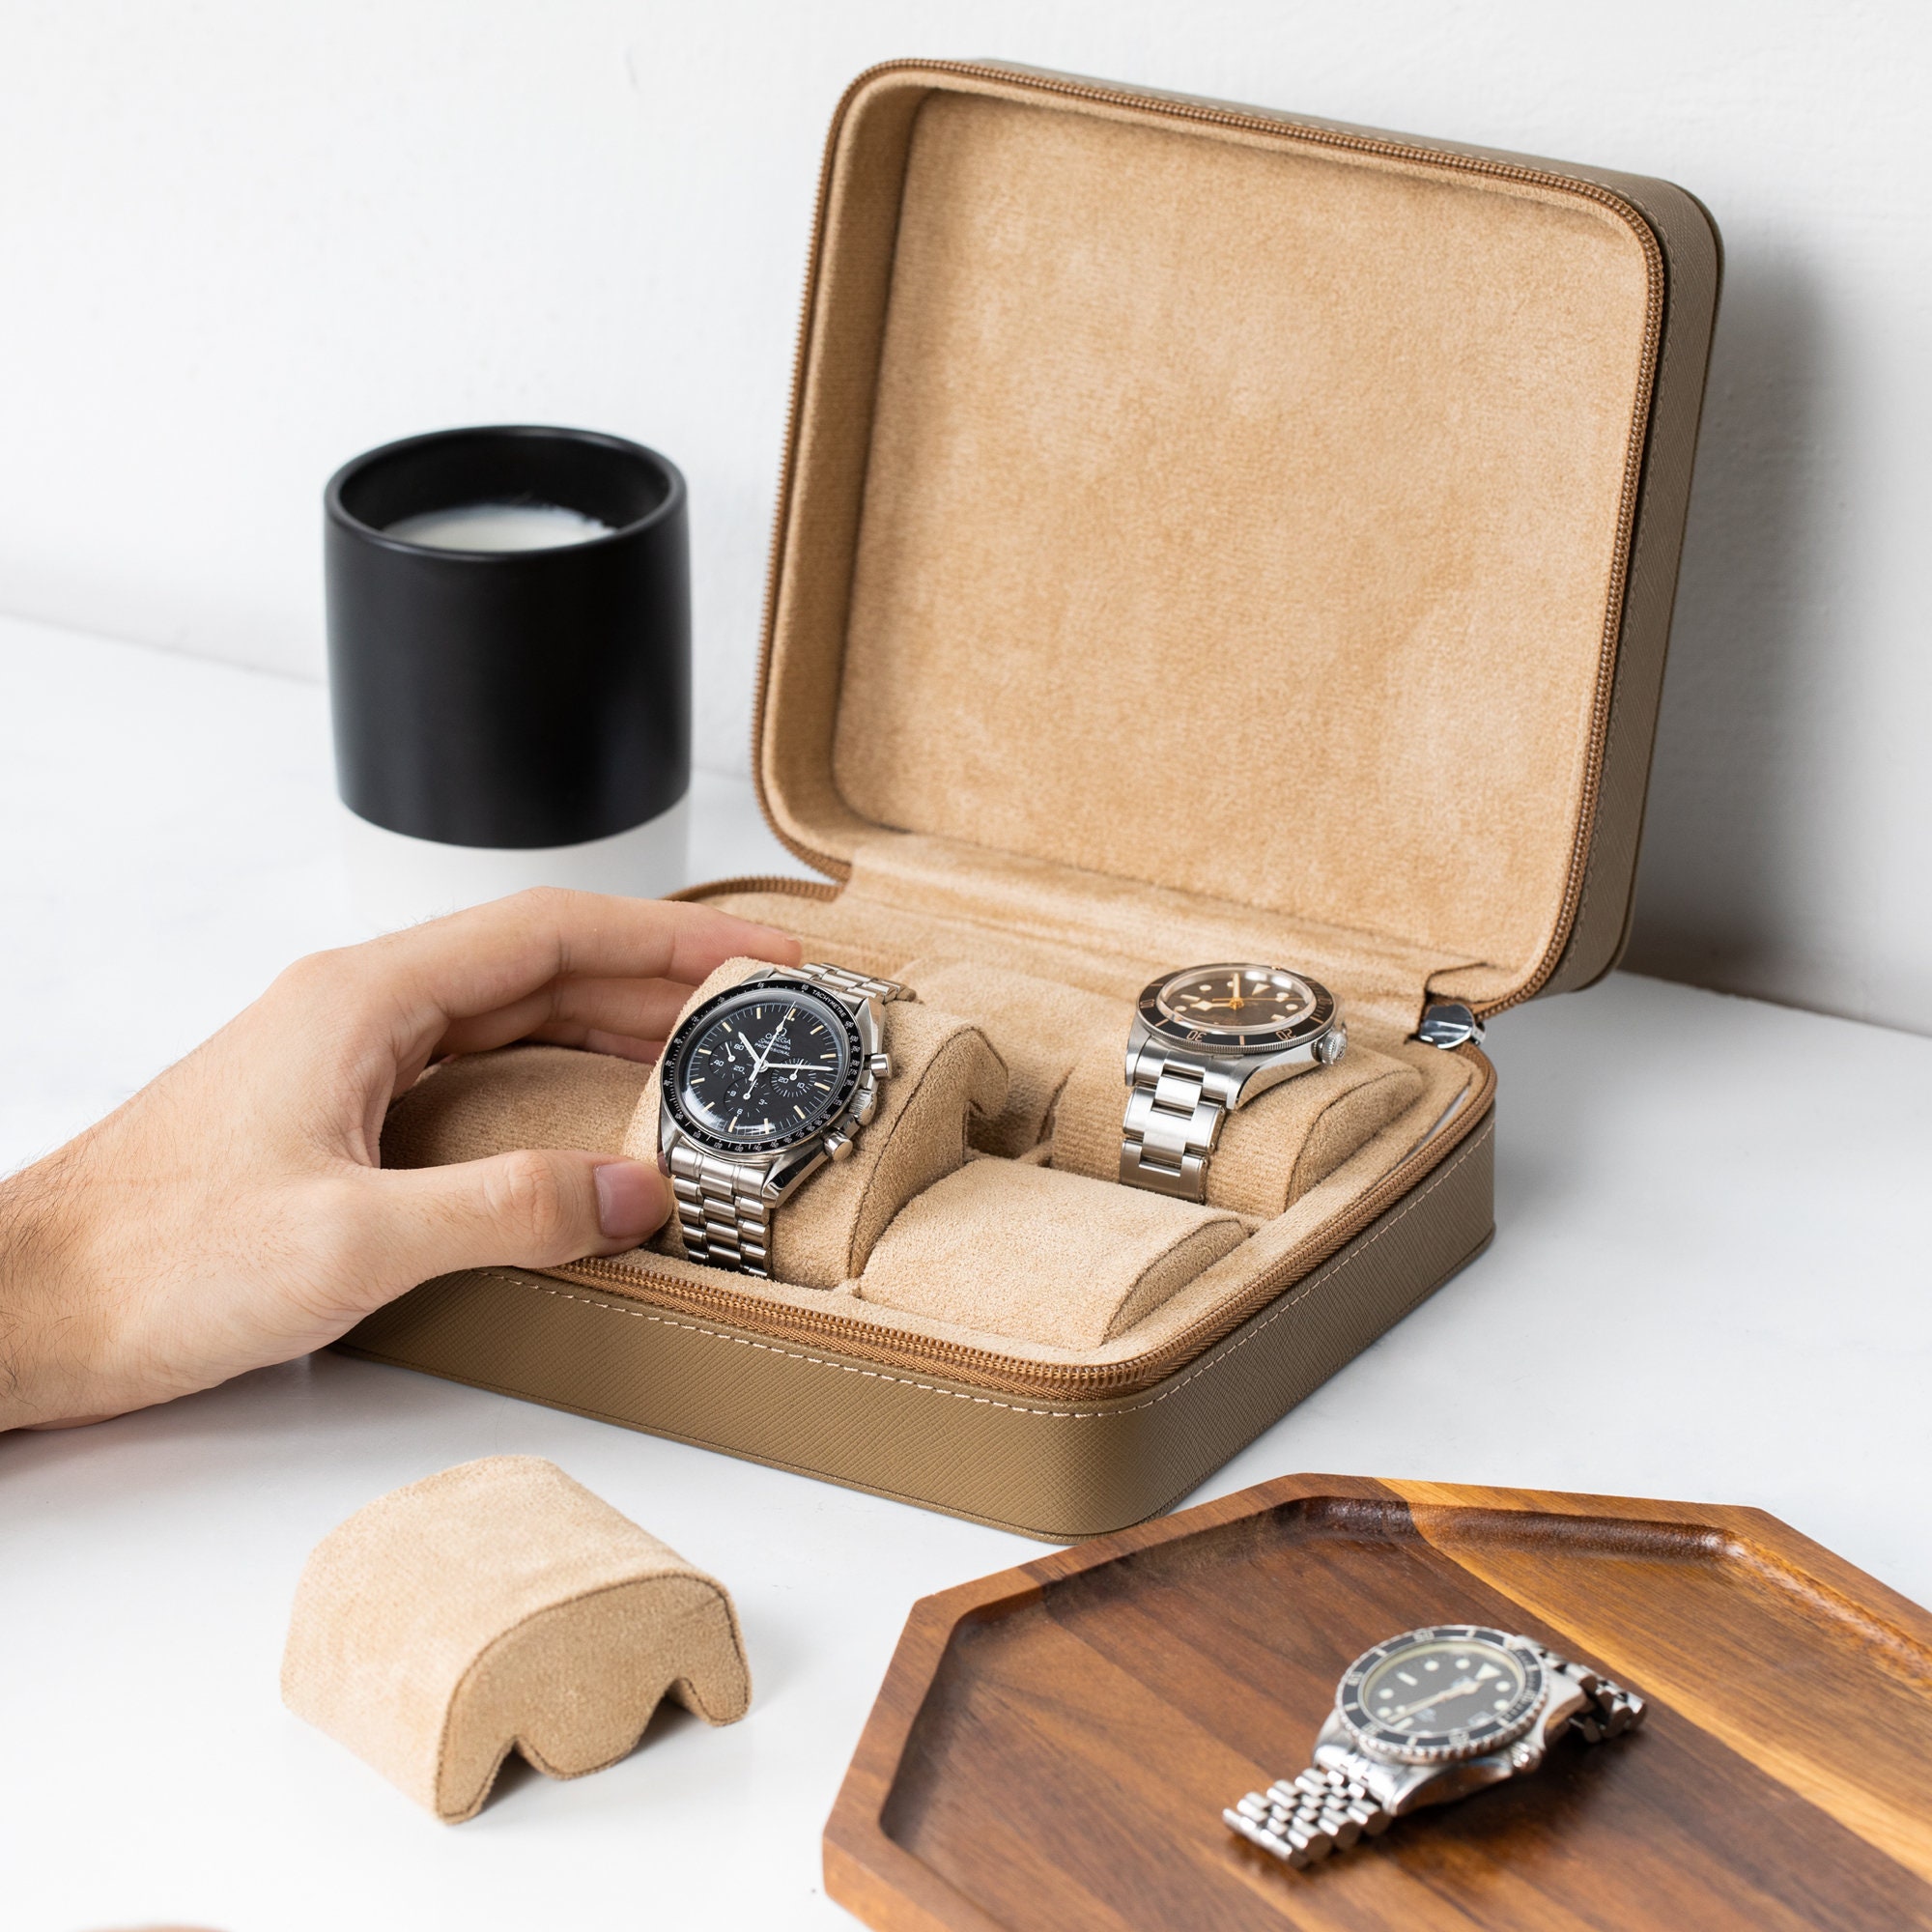 Watch Case For 6 Watches - Navy Blue - €179 - Free shipping